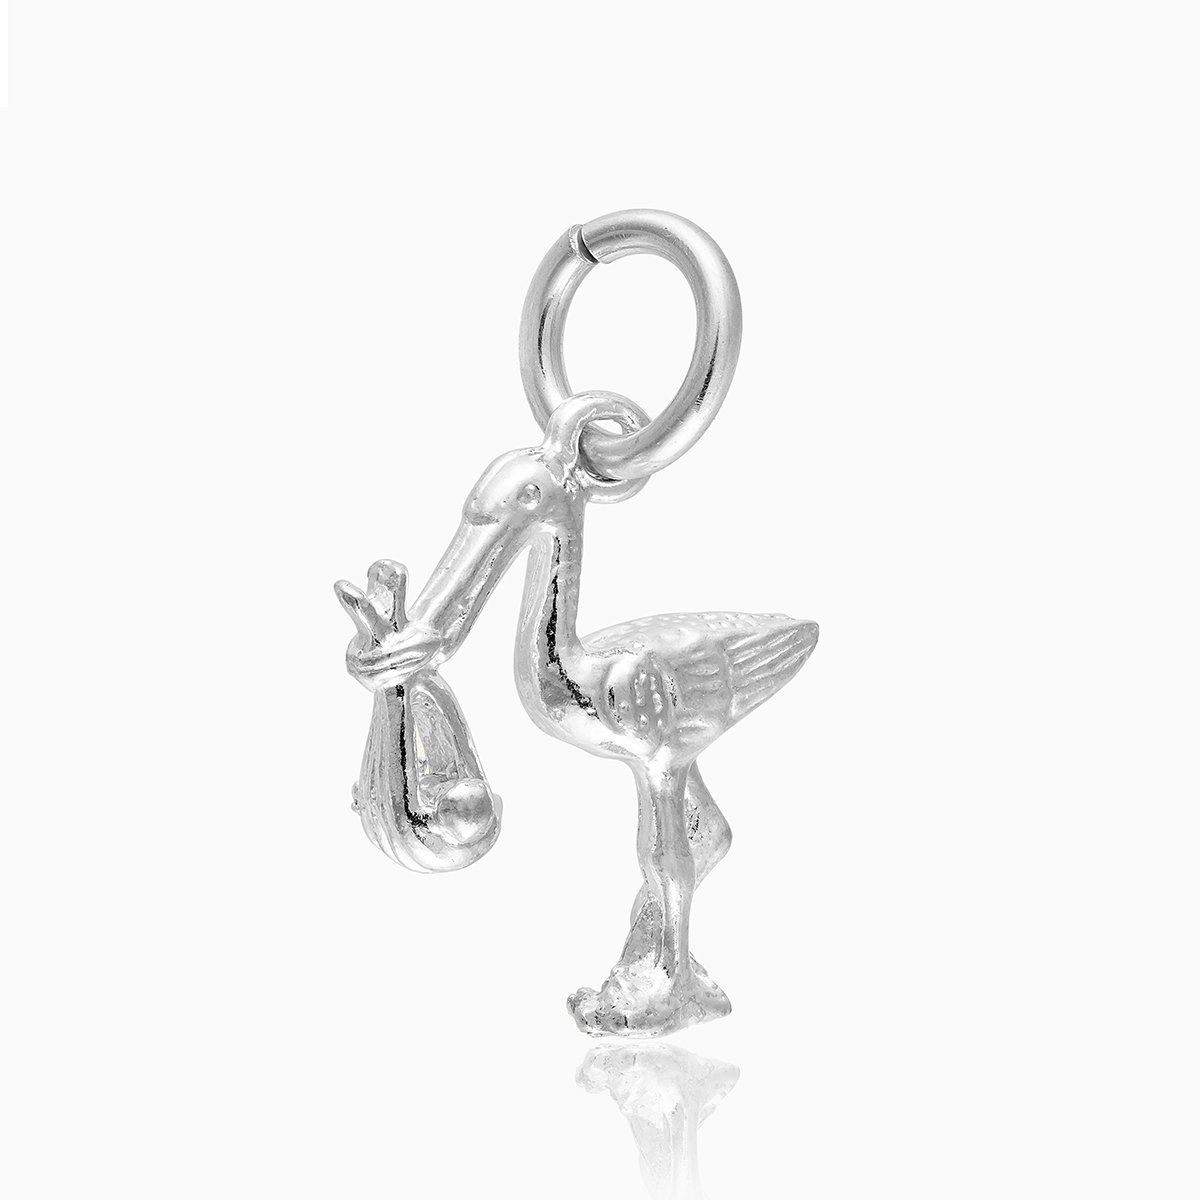 Product title: Stork and Baby Charm, product type: Charm